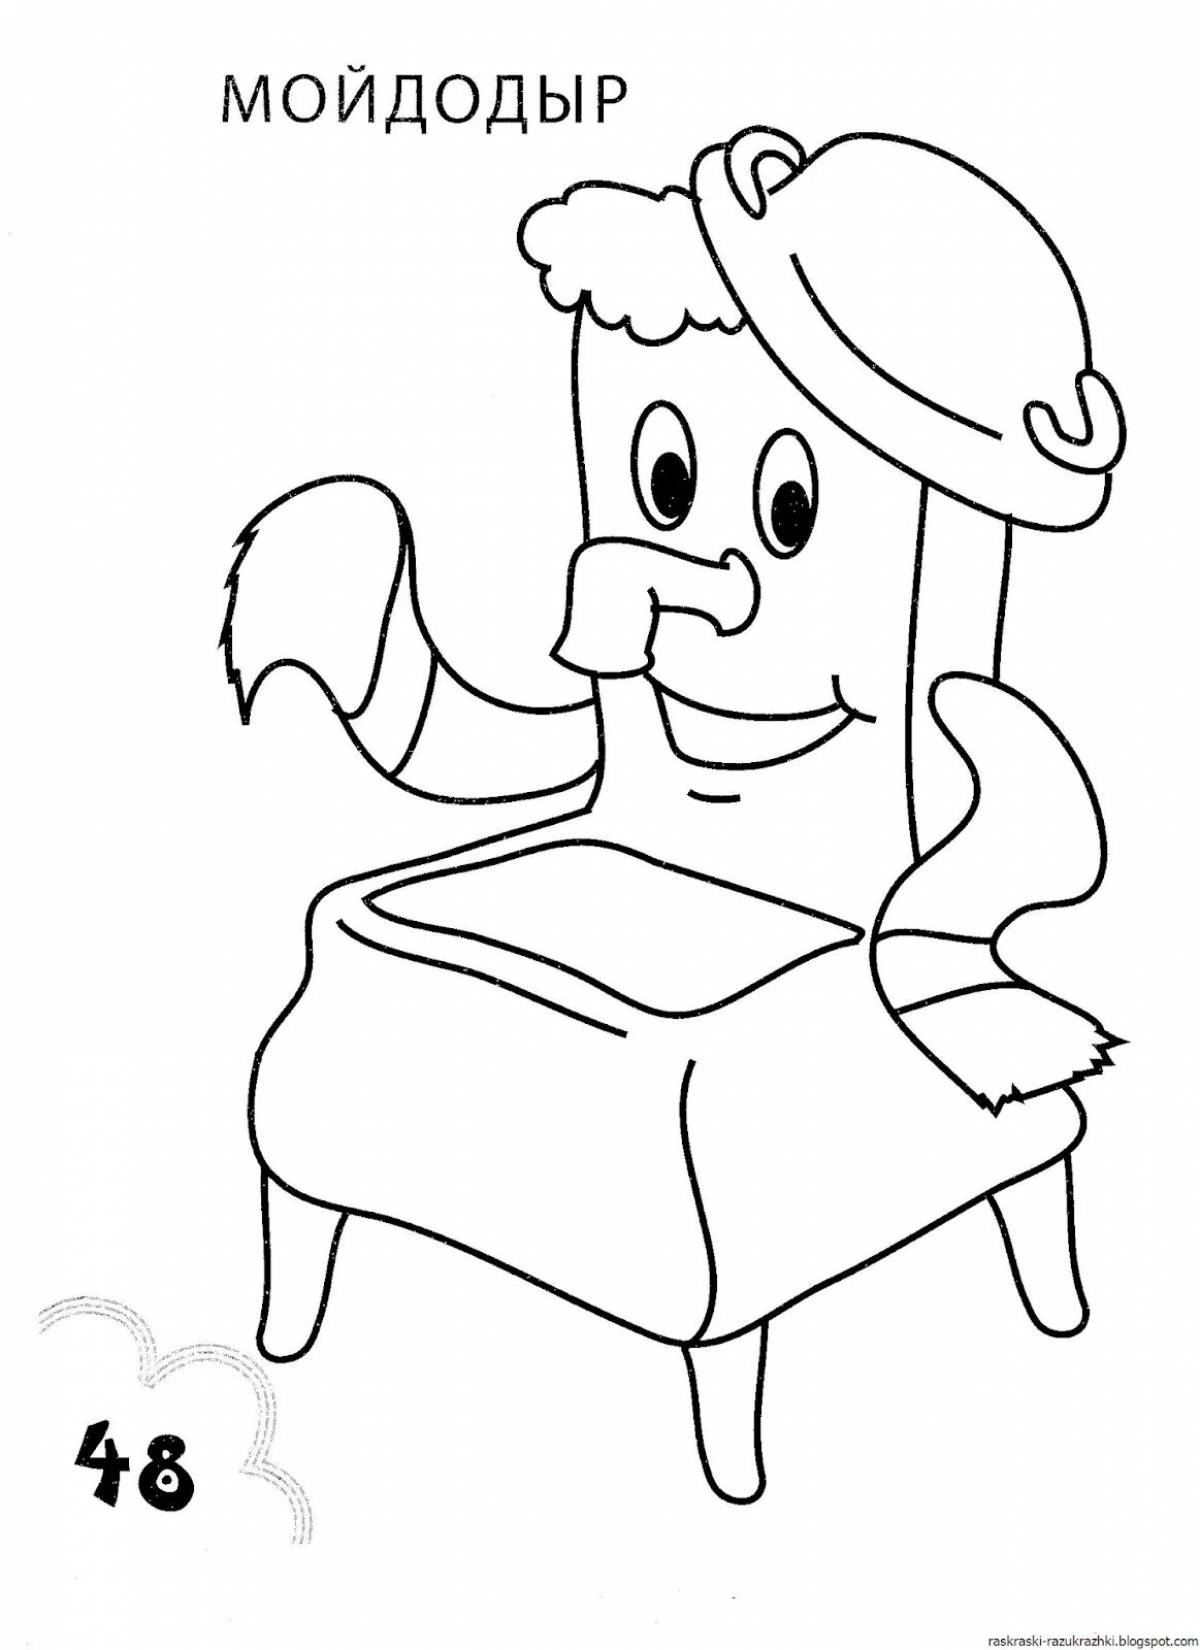 Midodyr coloring page with splashes of color for children 3-4 years old